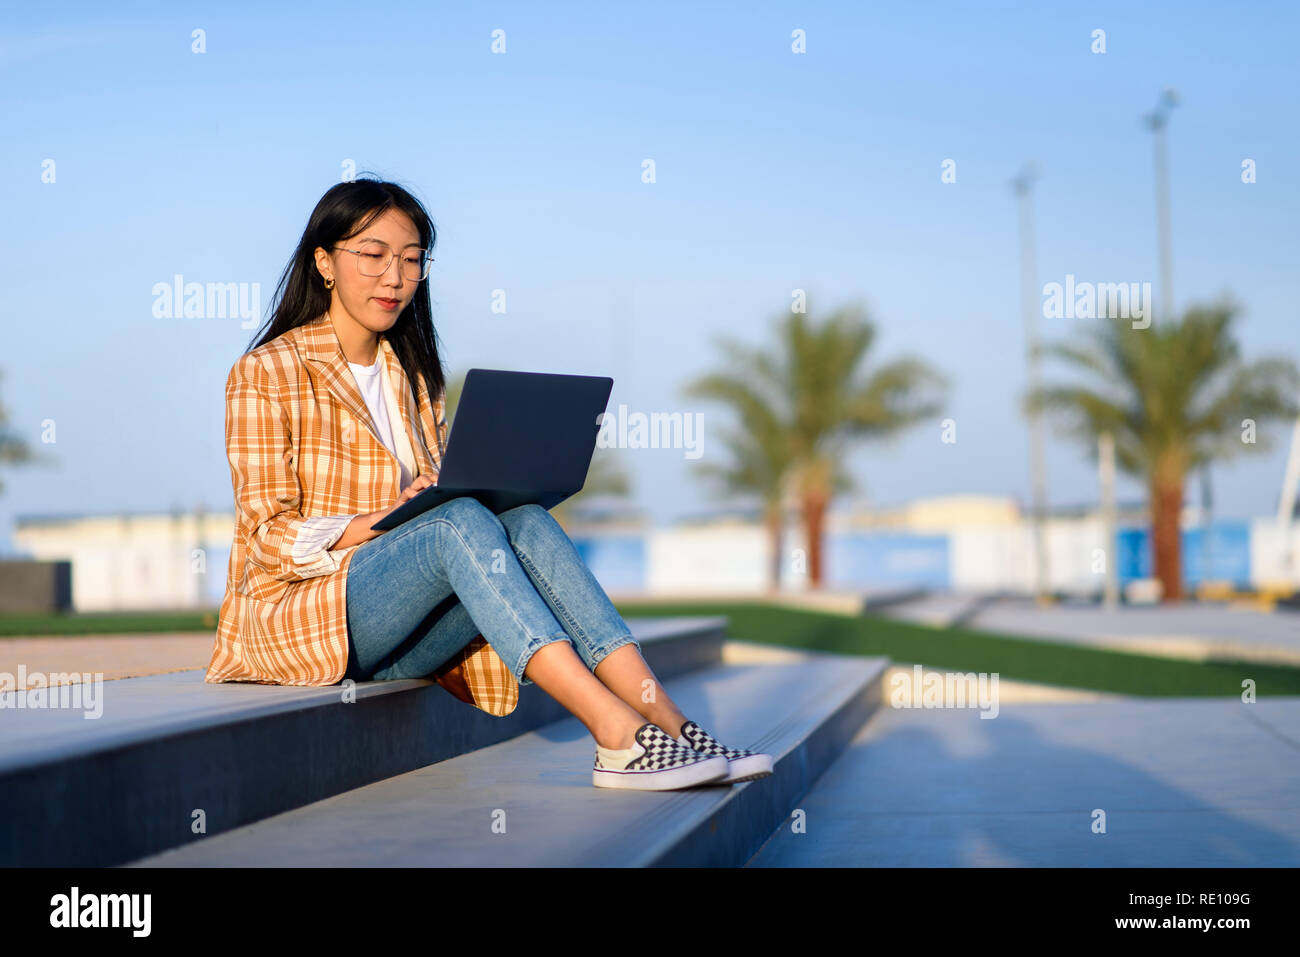 Fashionable Asian girl working on laptop outdoors Stock Photo